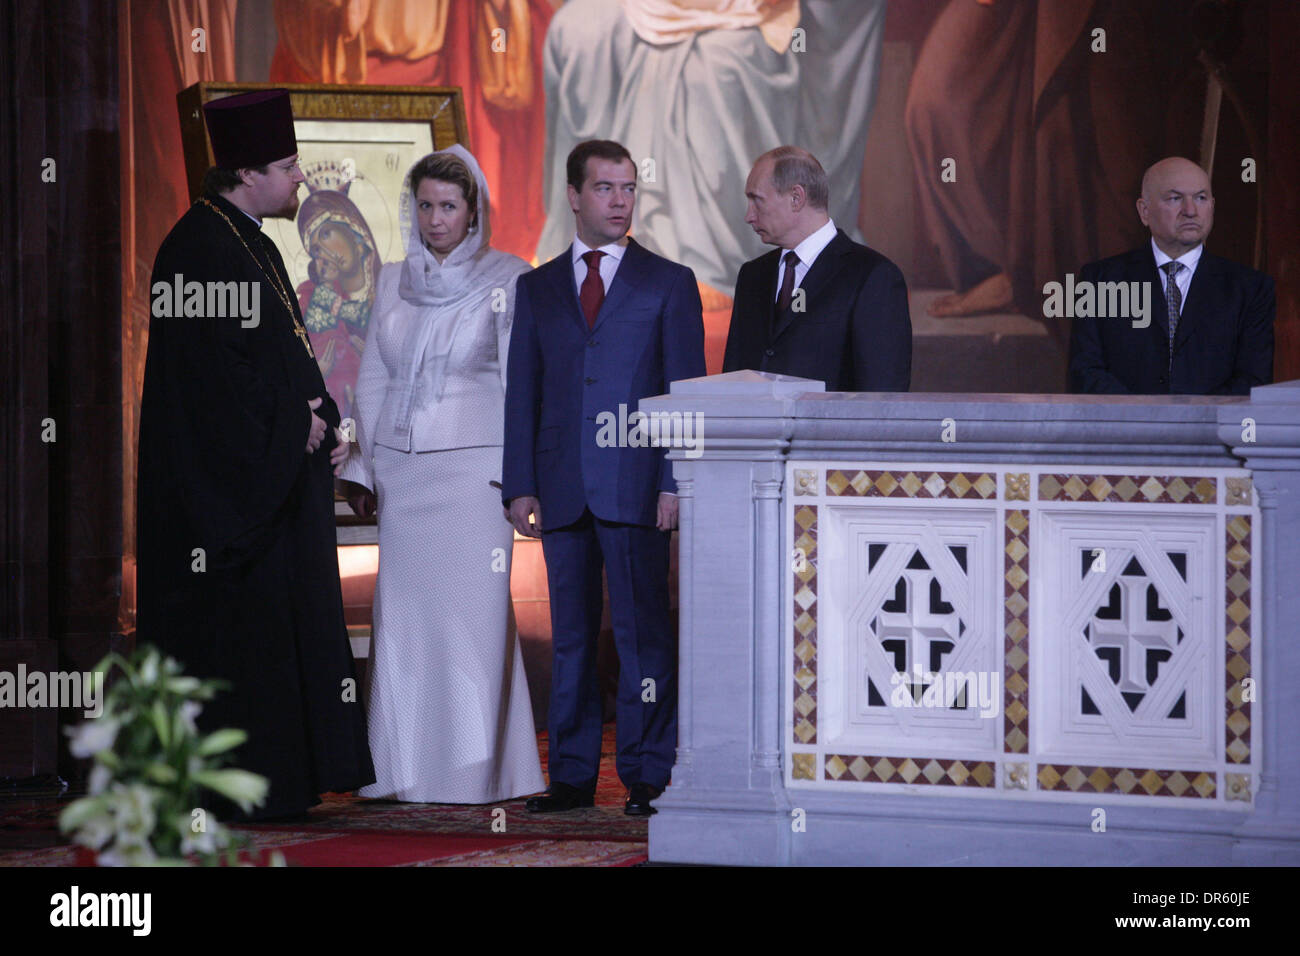 Apr 19, 2009 - Moscow, Russia - Prime Minister of Russia VLADIMIR PUTIN (c) and President DMITRY MEDVEDEV with wife Svetlana (L) get Easter blessing at Orthodox ceremony at the Christ the Savior Cathedral in Moscow (Mayor of Moscow Yuri Luzhkov pictured right corner) (Credit Image: © PhotoXpress/ZUMA Press) Stock Photo